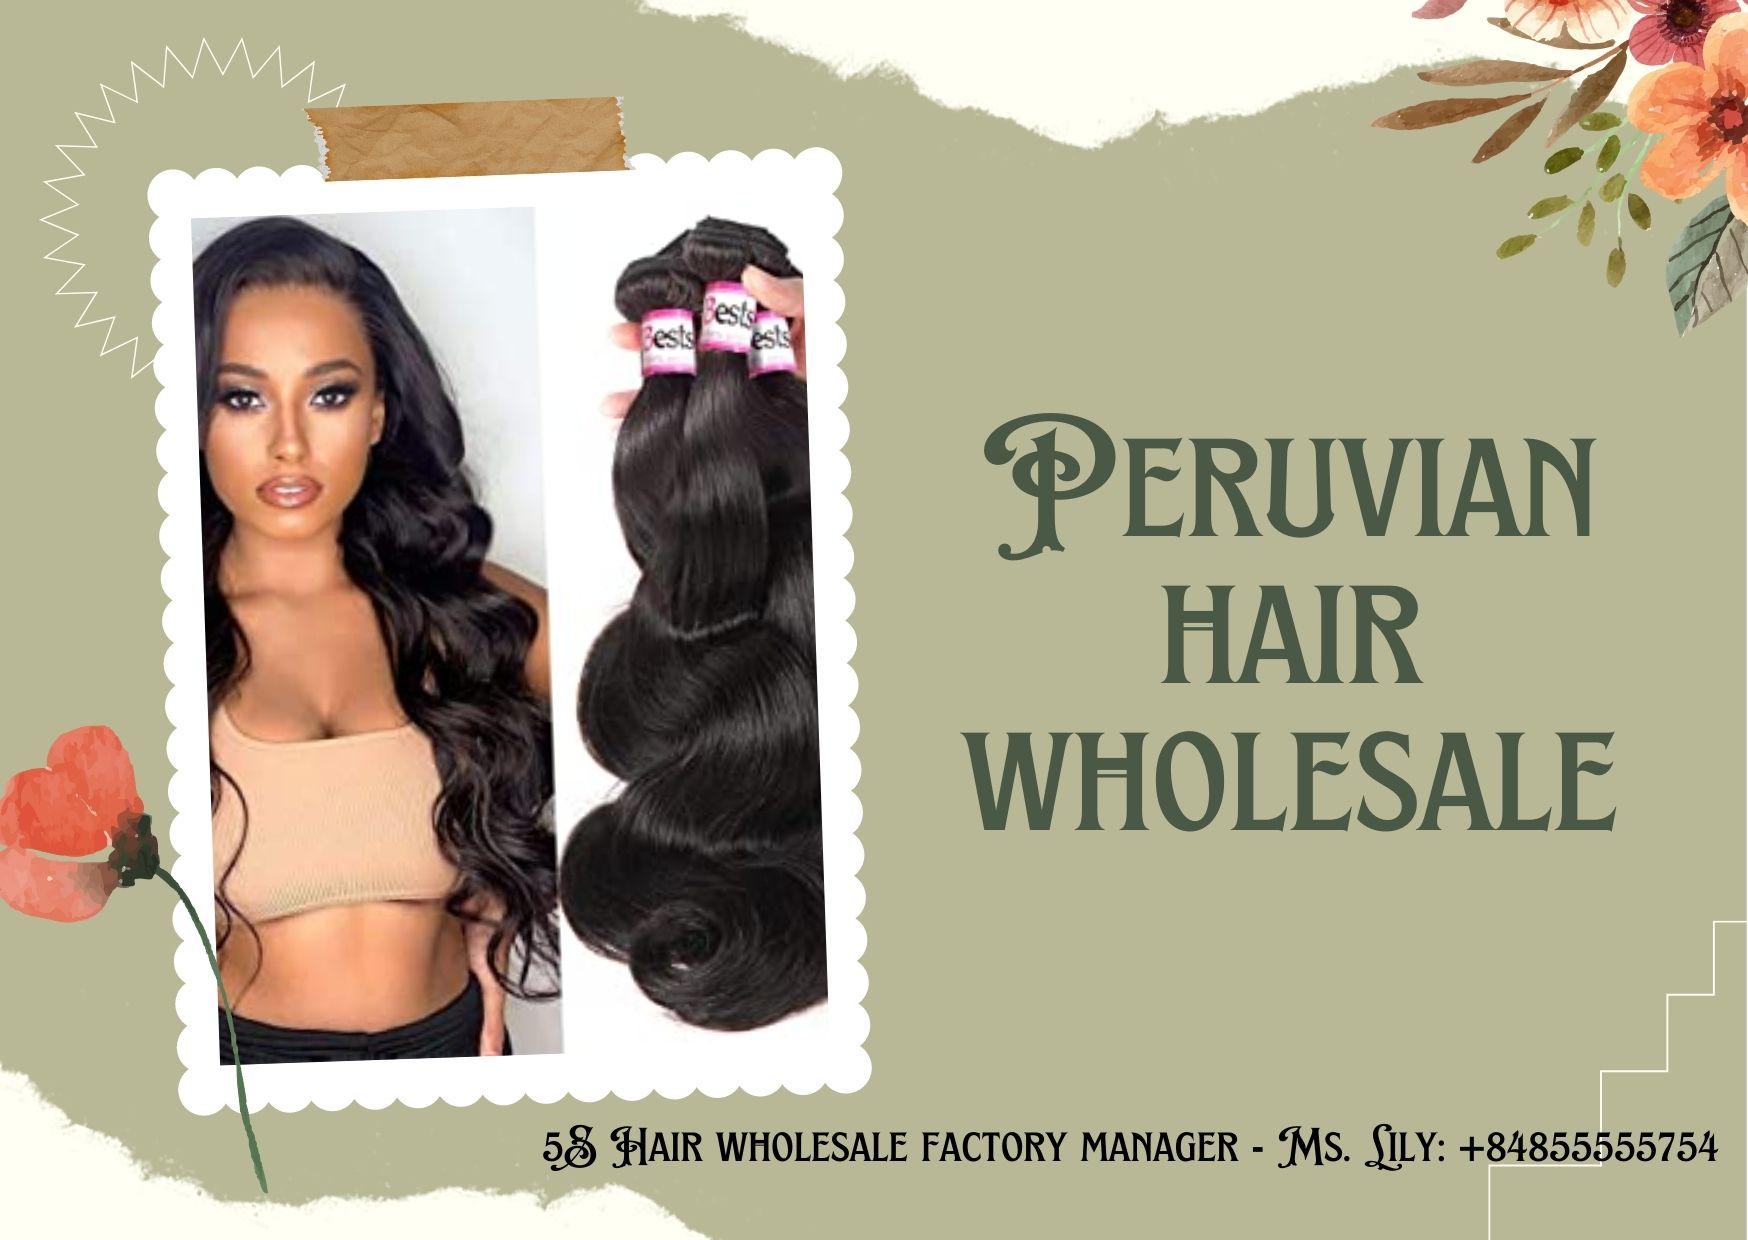 peruvian-hair-wholesale-how-much-do-you-know-about-this-vendor-1